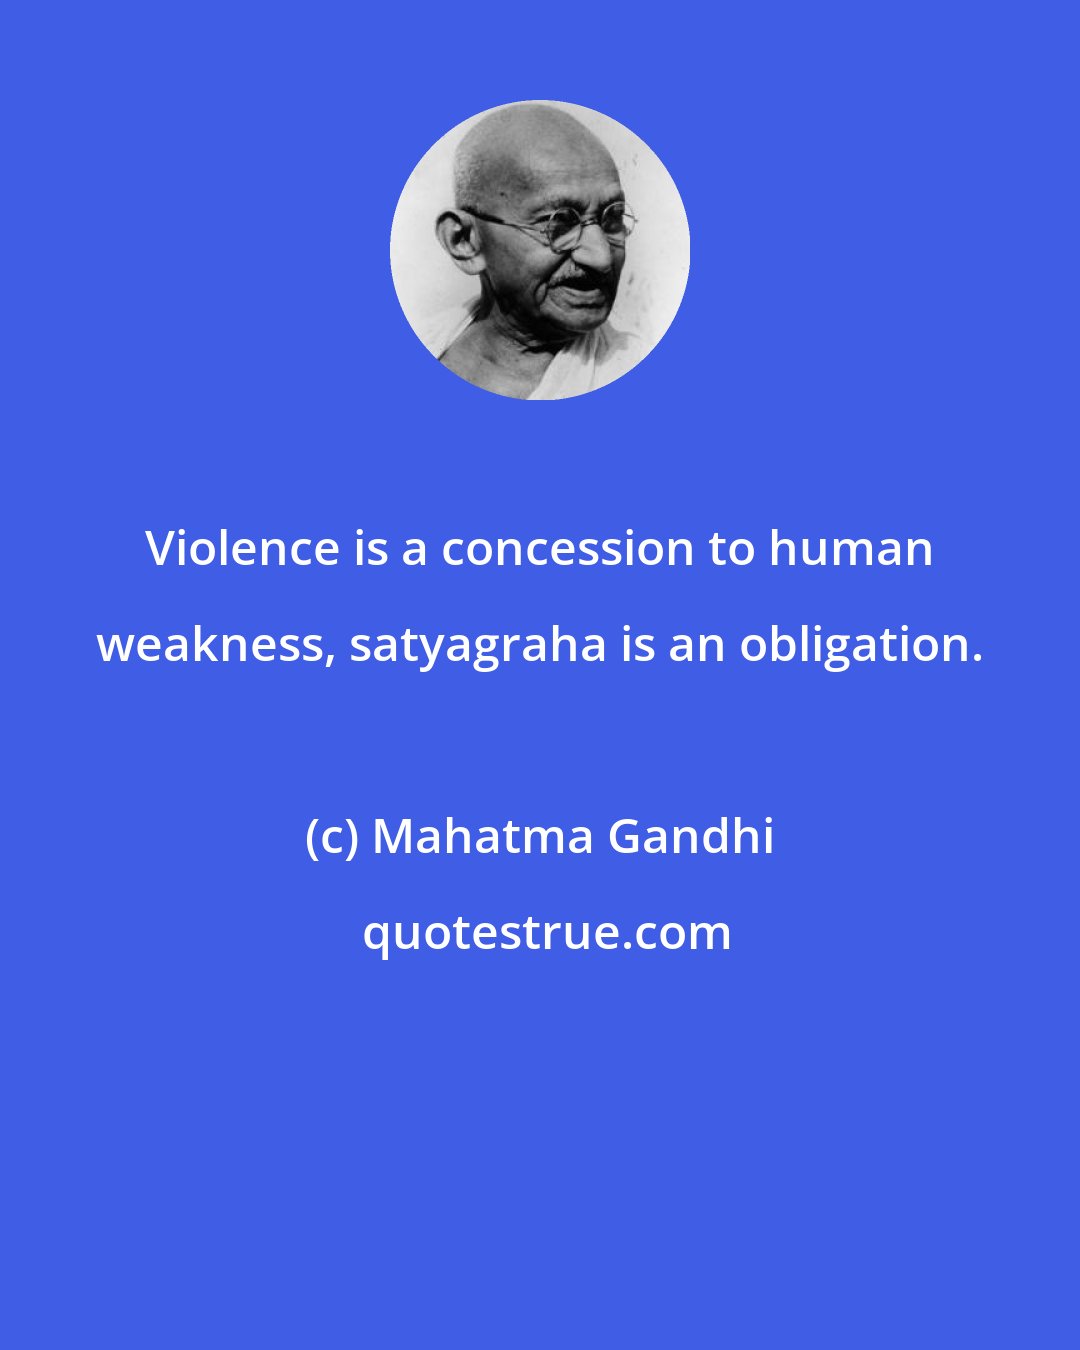 Mahatma Gandhi: Violence is a concession to human weakness, satyagraha is an obligation.